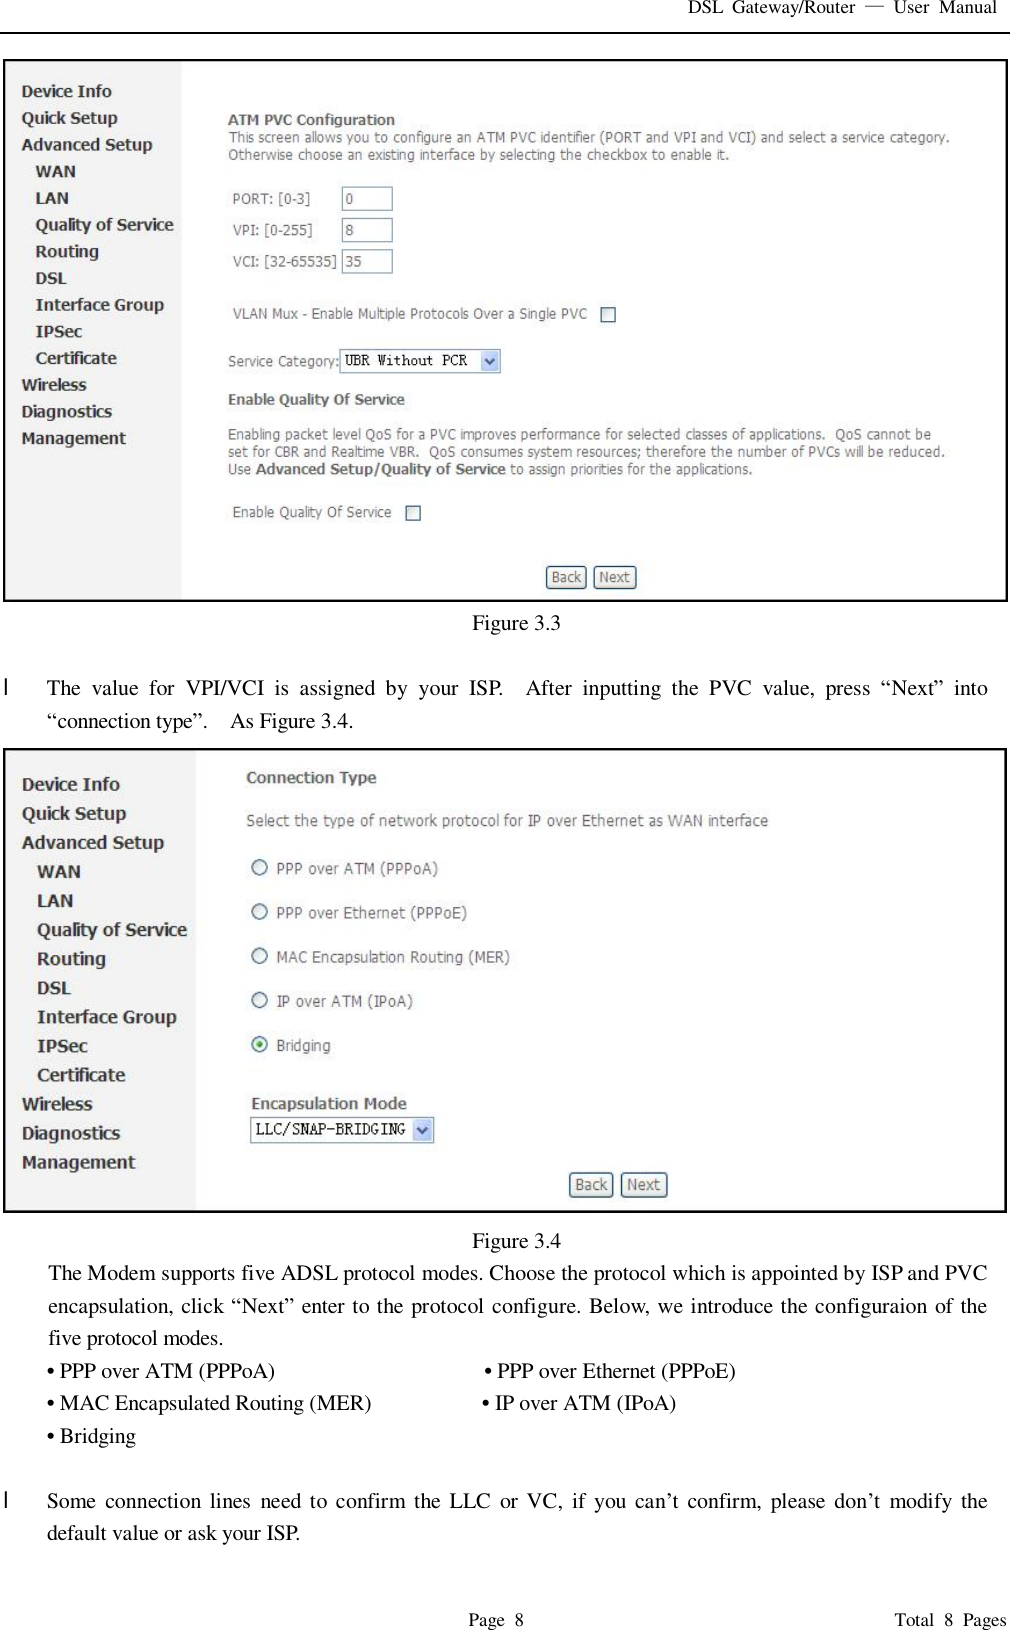 DSL Gateway/Router  — User Manual  Page 8                                       Total 8 Pages  Figure 3.3  l  The value for VPI/VCI is assigned by your ISP.  After inputting the PVC value, press  “Next” into “connection type”.  As Figure 3.4.   Figure 3.4 The Modem supports five ADSL protocol modes. Choose the protocol which is appointed by ISP and PVC encapsulation, click “Next” enter to the protocol configure. Below, we introduce the configuraion of the five protocol modes. • PPP over ATM (PPPoA)                   • PPP over Ethernet (PPPoE) • MAC Encapsulated Routing (MER)          • IP over ATM (IPoA) • Bridging  l  Some connection lines need to confirm the LLC or VC, if you can’t confirm, please don’t modify the default value or ask your ISP. 